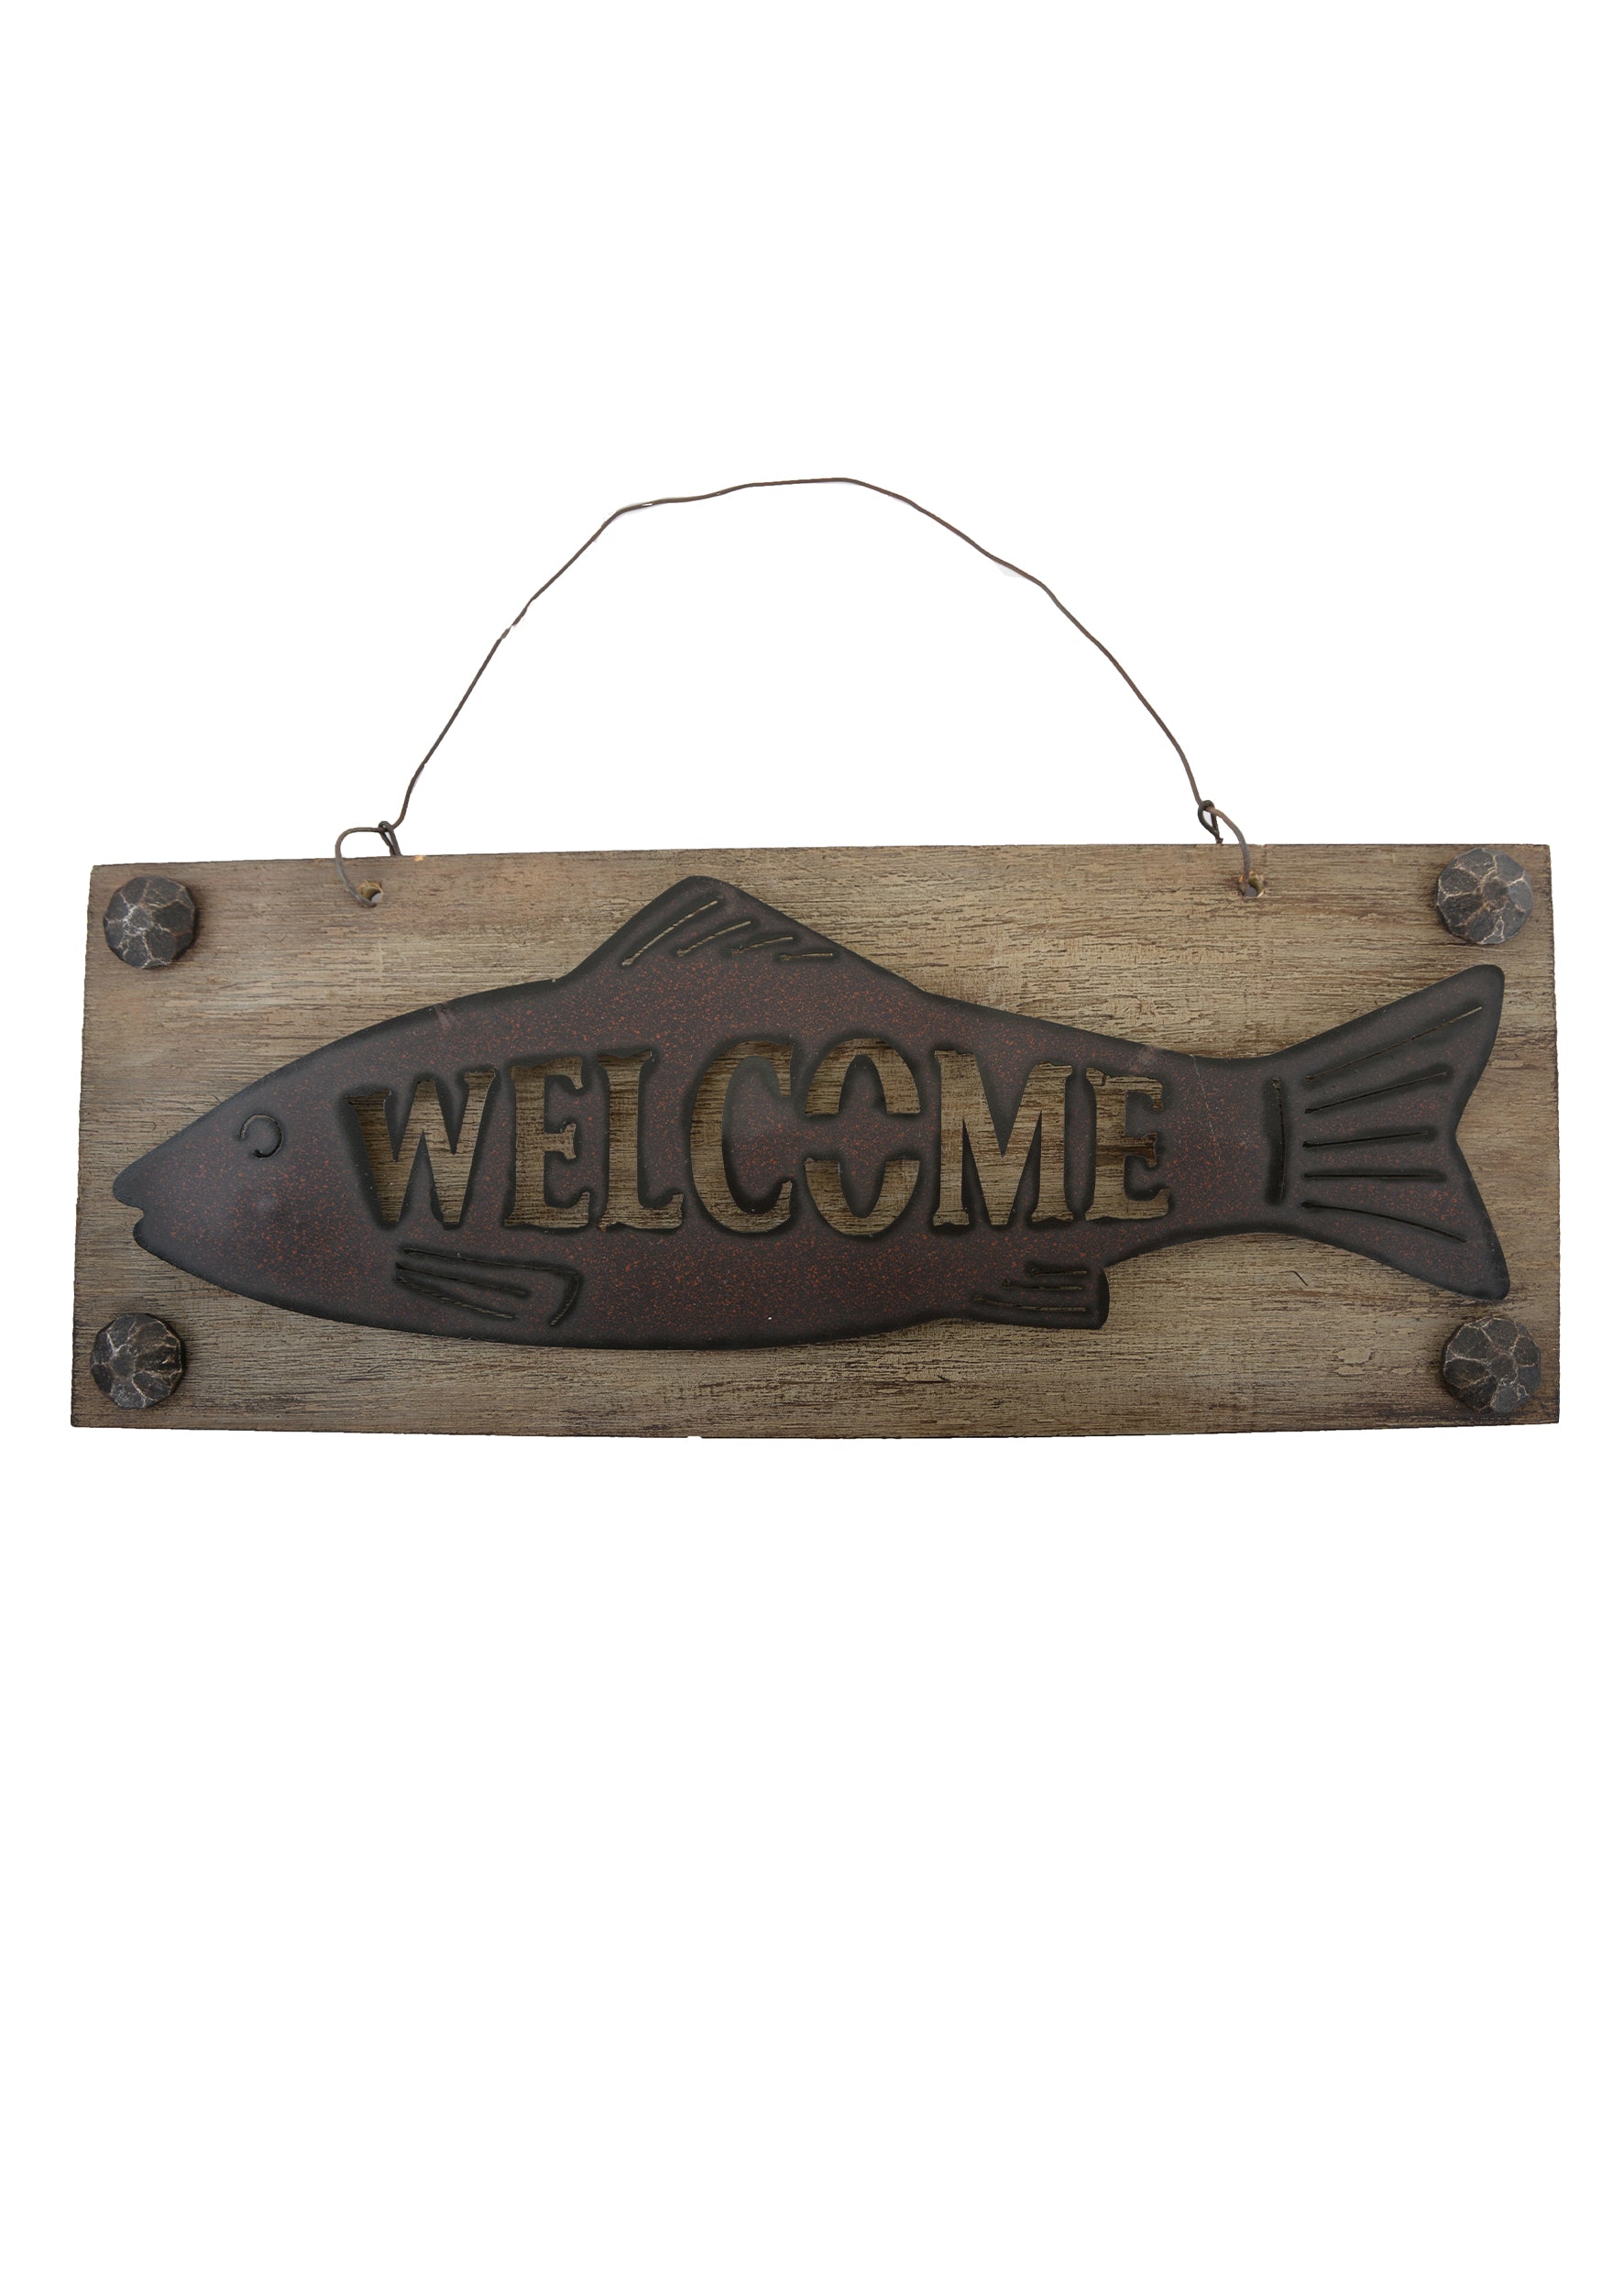 Pure Western Metal Fish Cut Out Welcome Sign